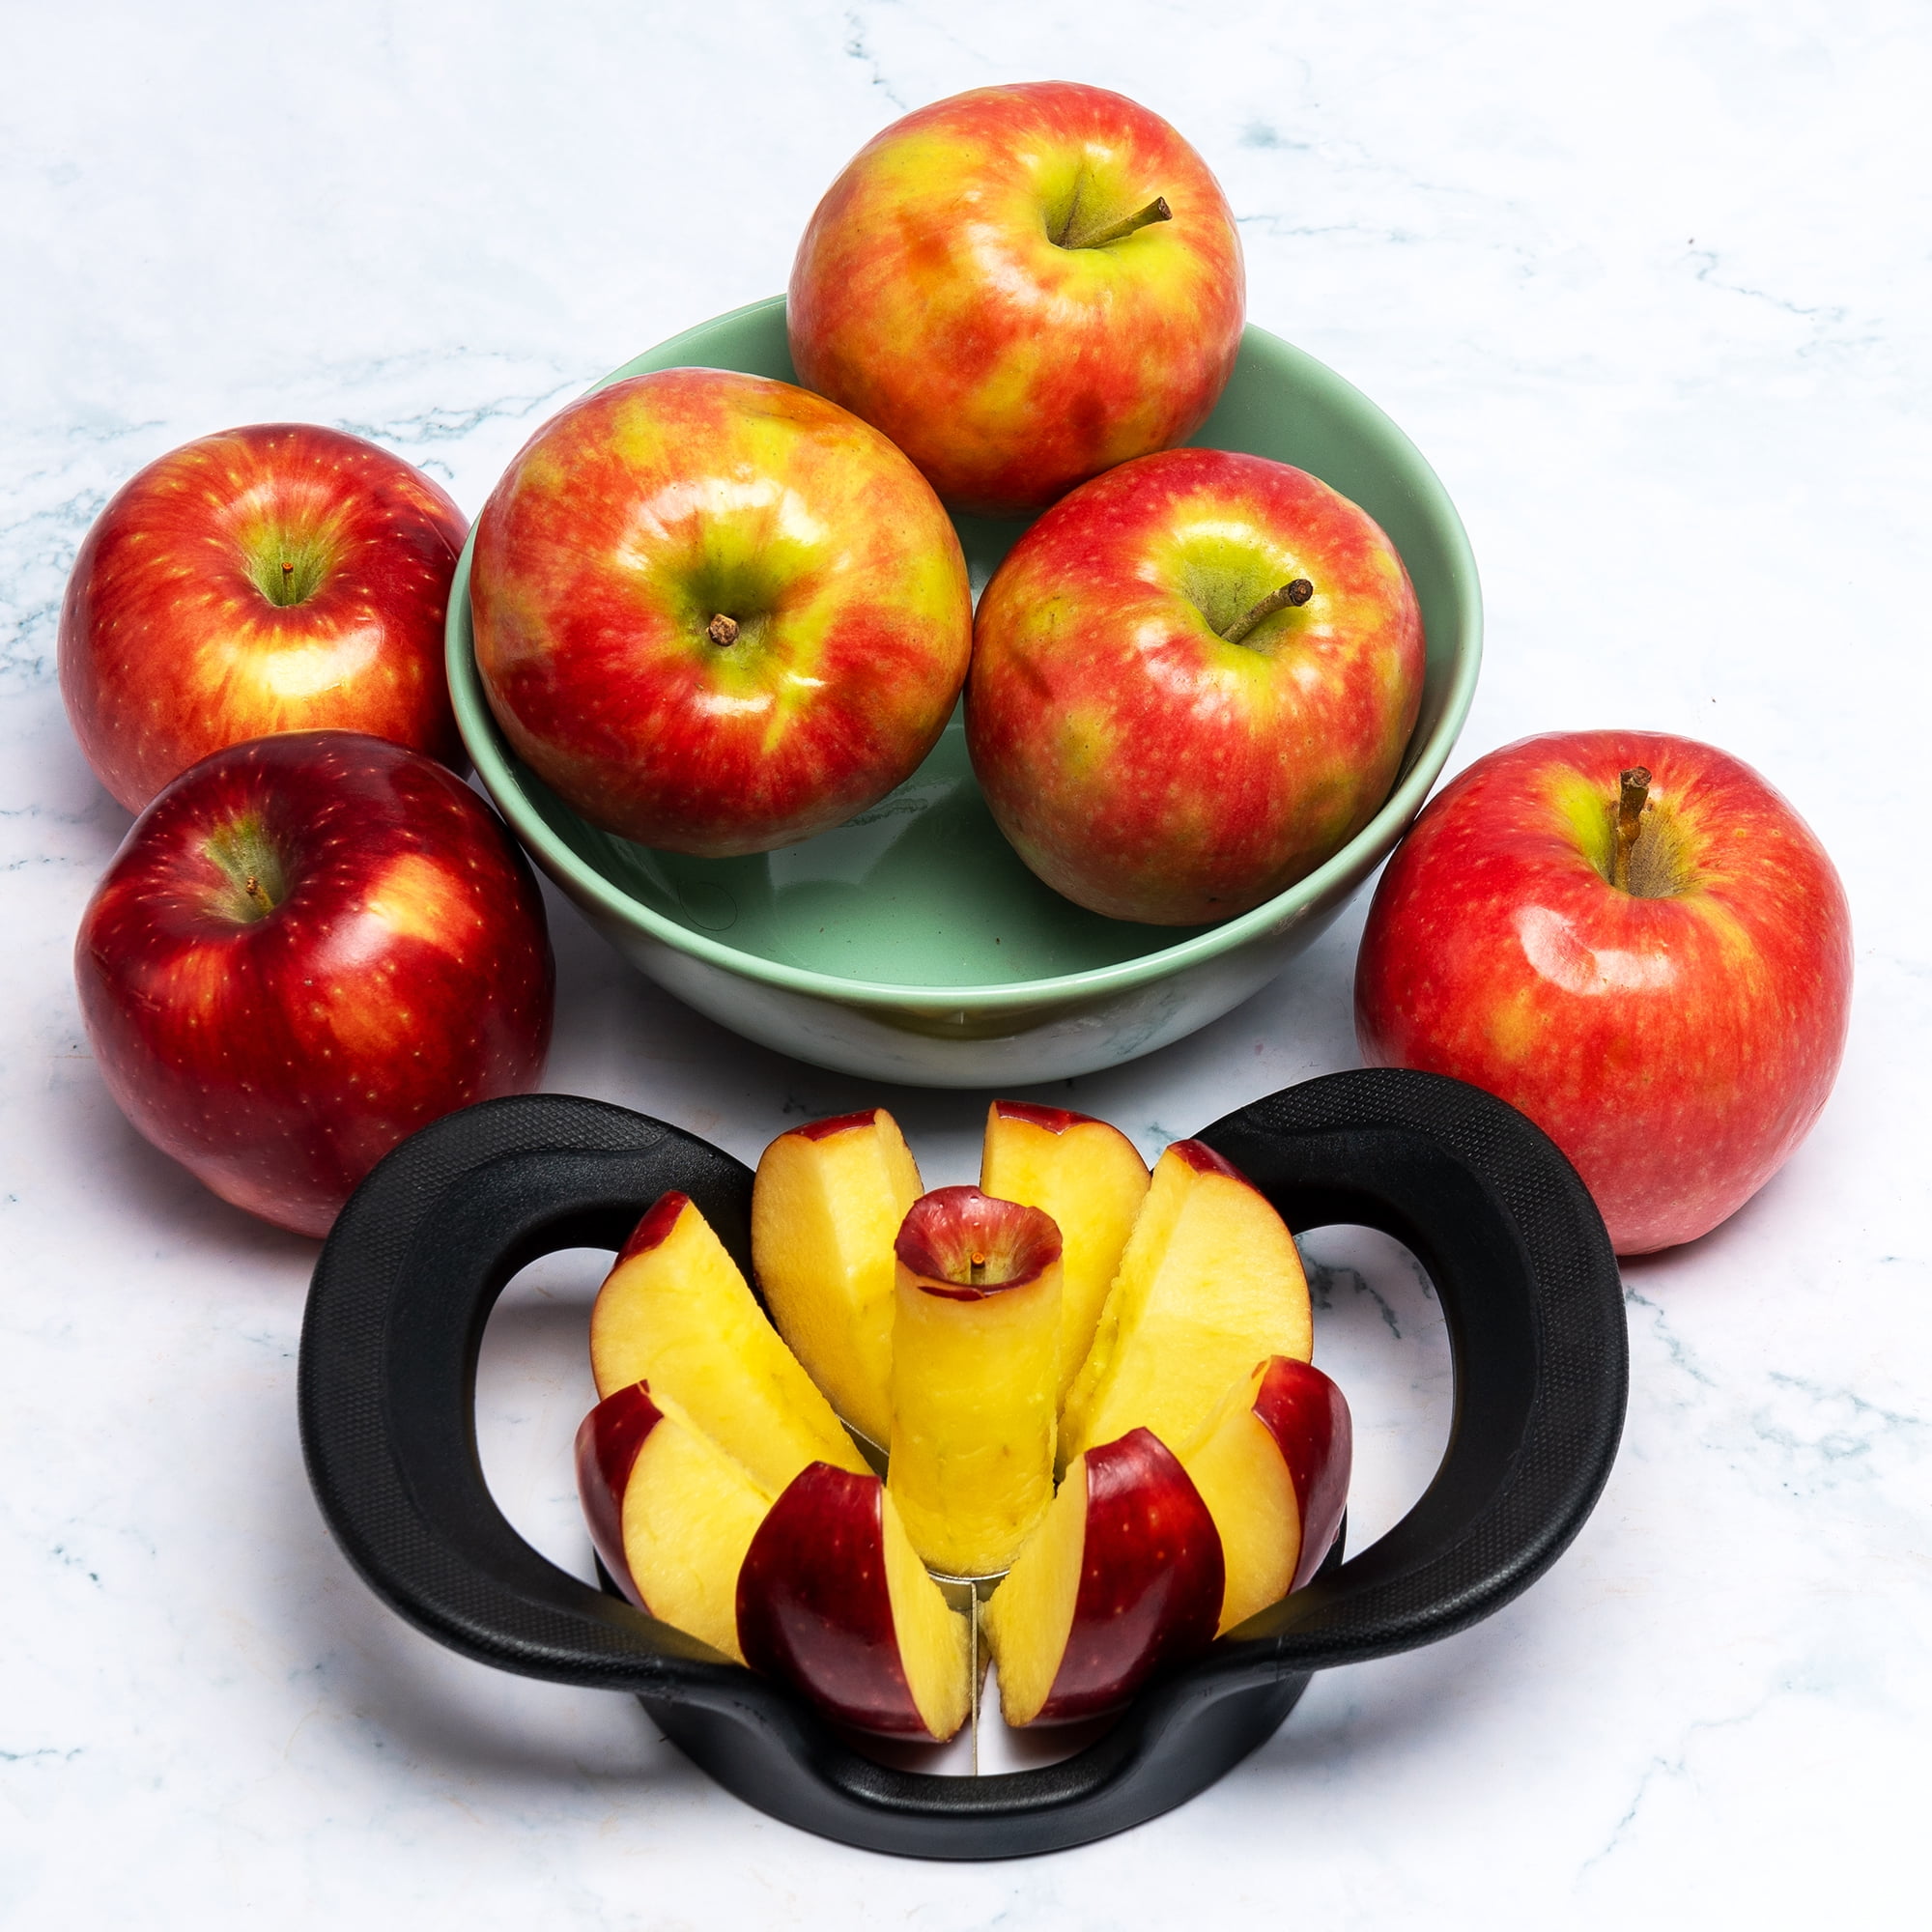 Chef Craft Stainless Steel Blade Apple Slicer, Wedger and Divider, Apple  Cutter and Corer Tool